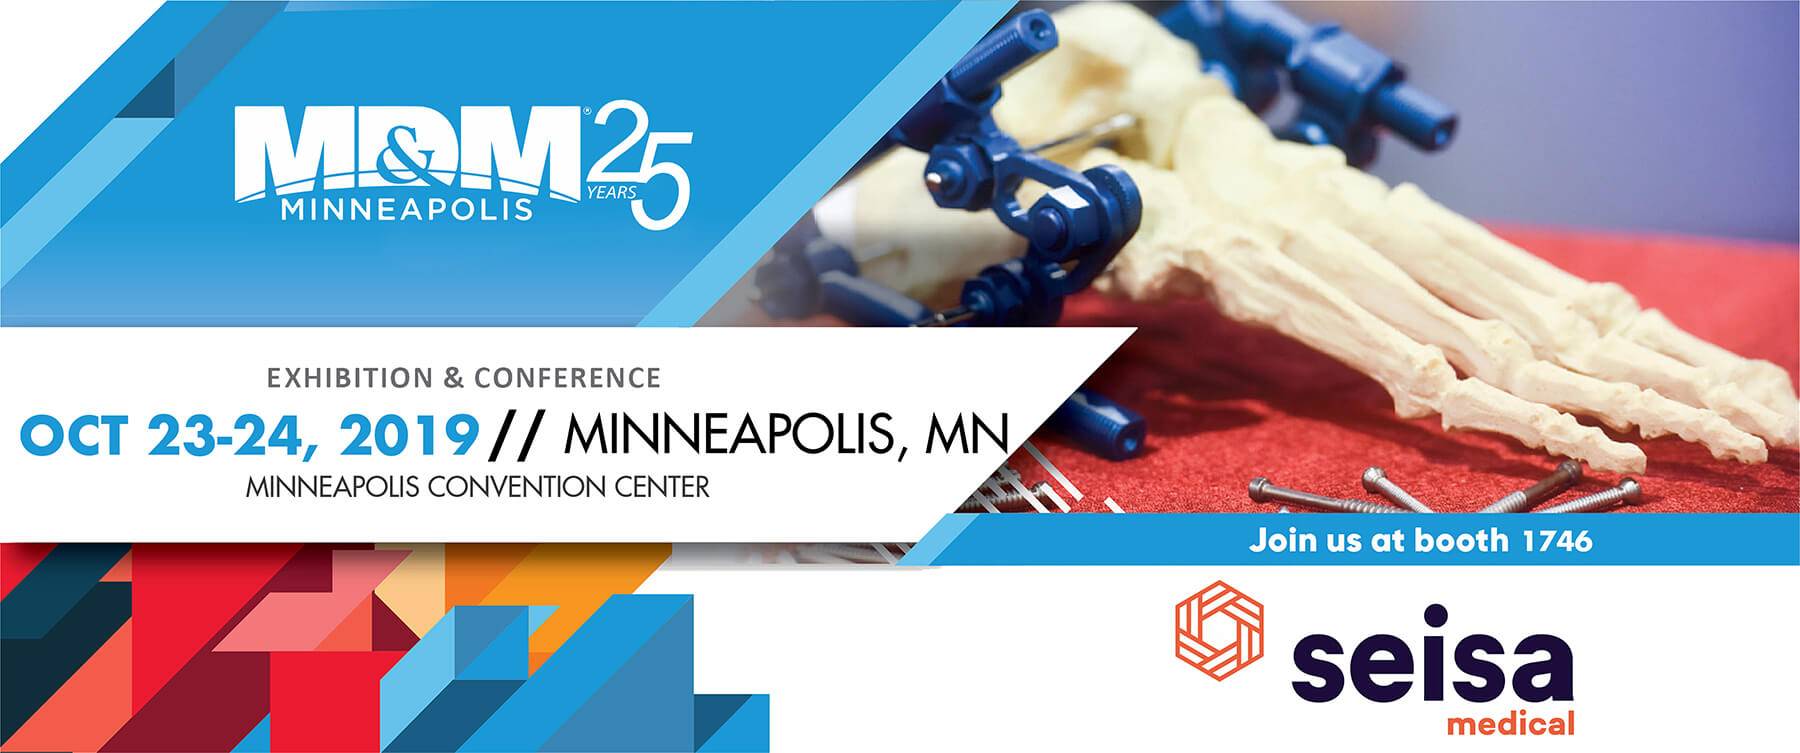 Seisa will be exhibiting at MD&M Minneapolis 2019